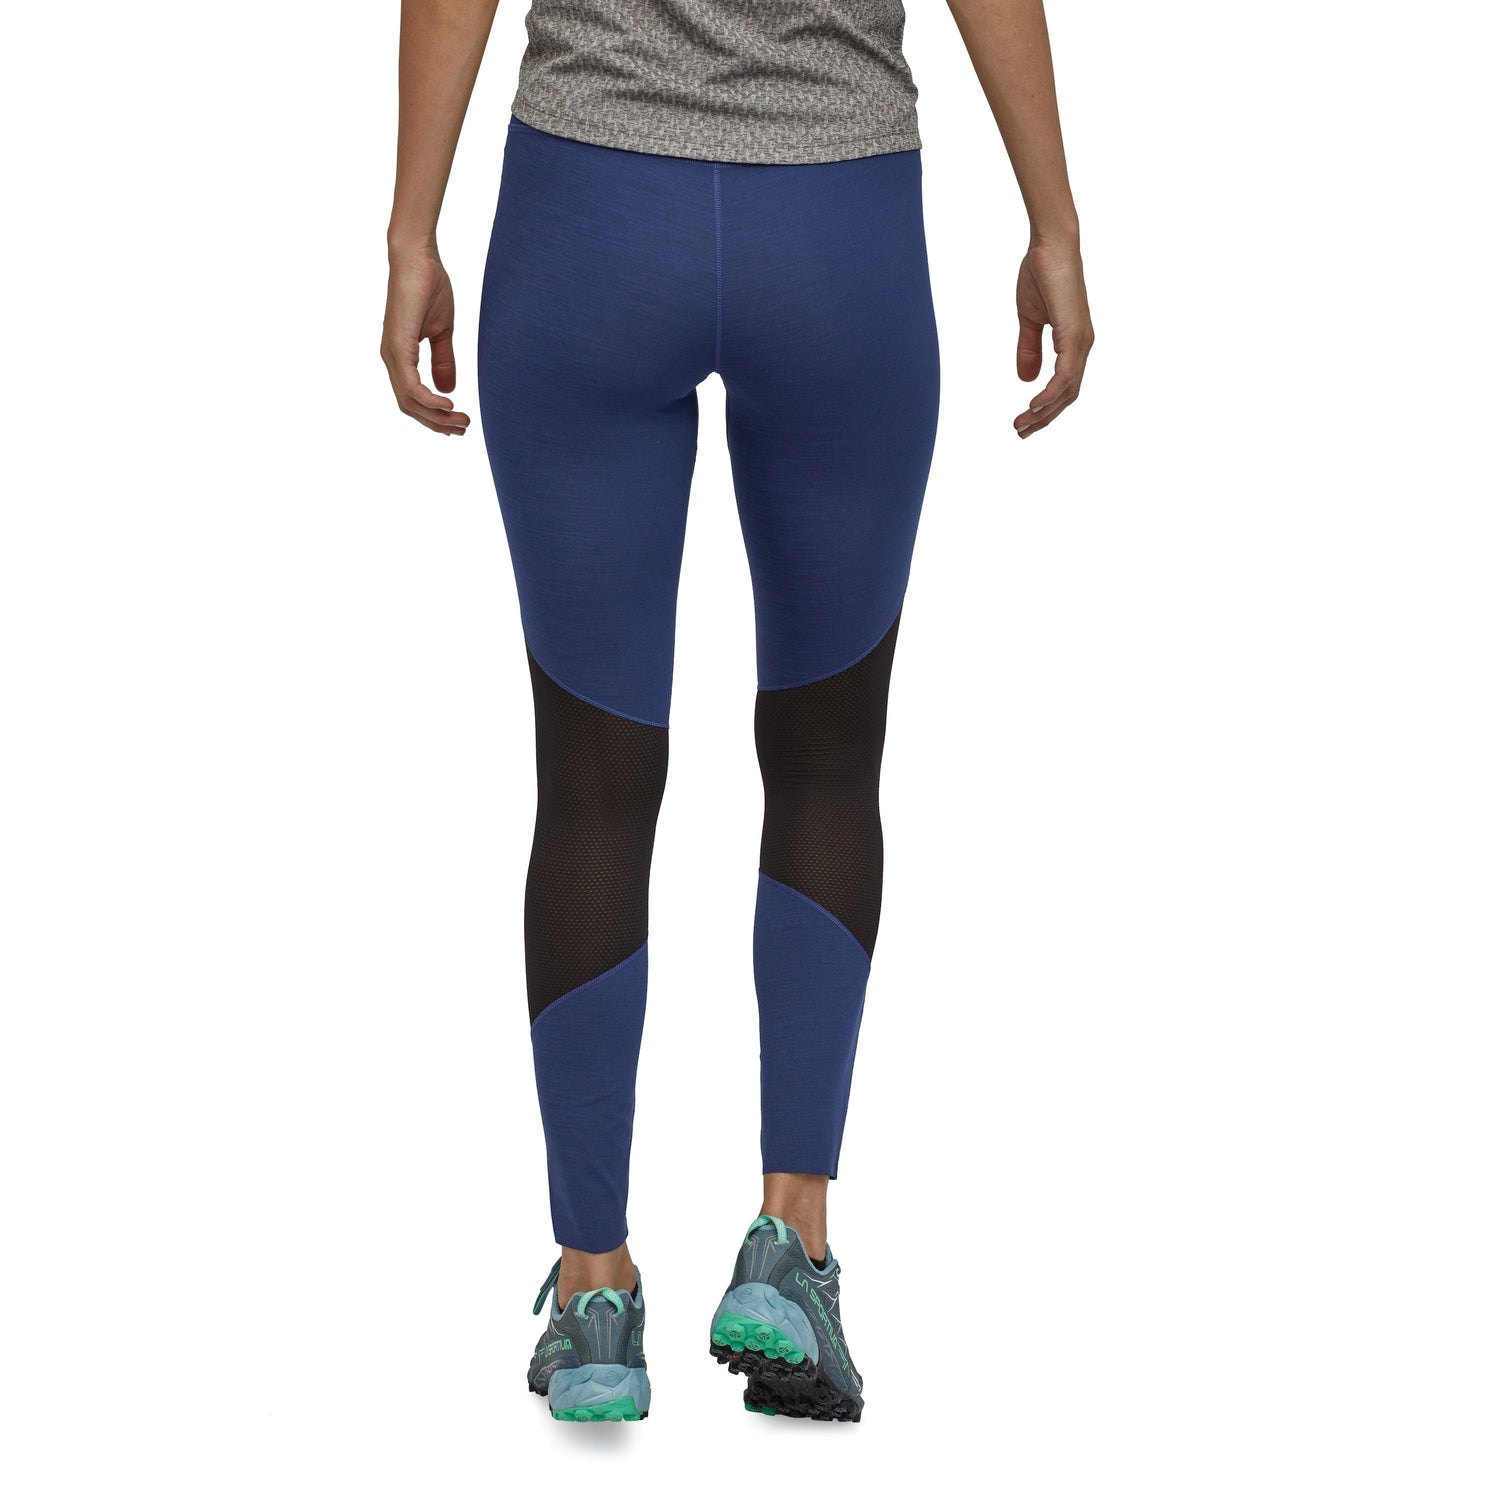 Patagonia W's Endless Run Tights - Recycled Polyester Cobalt Blue - Classic Navy X-Dye Pants